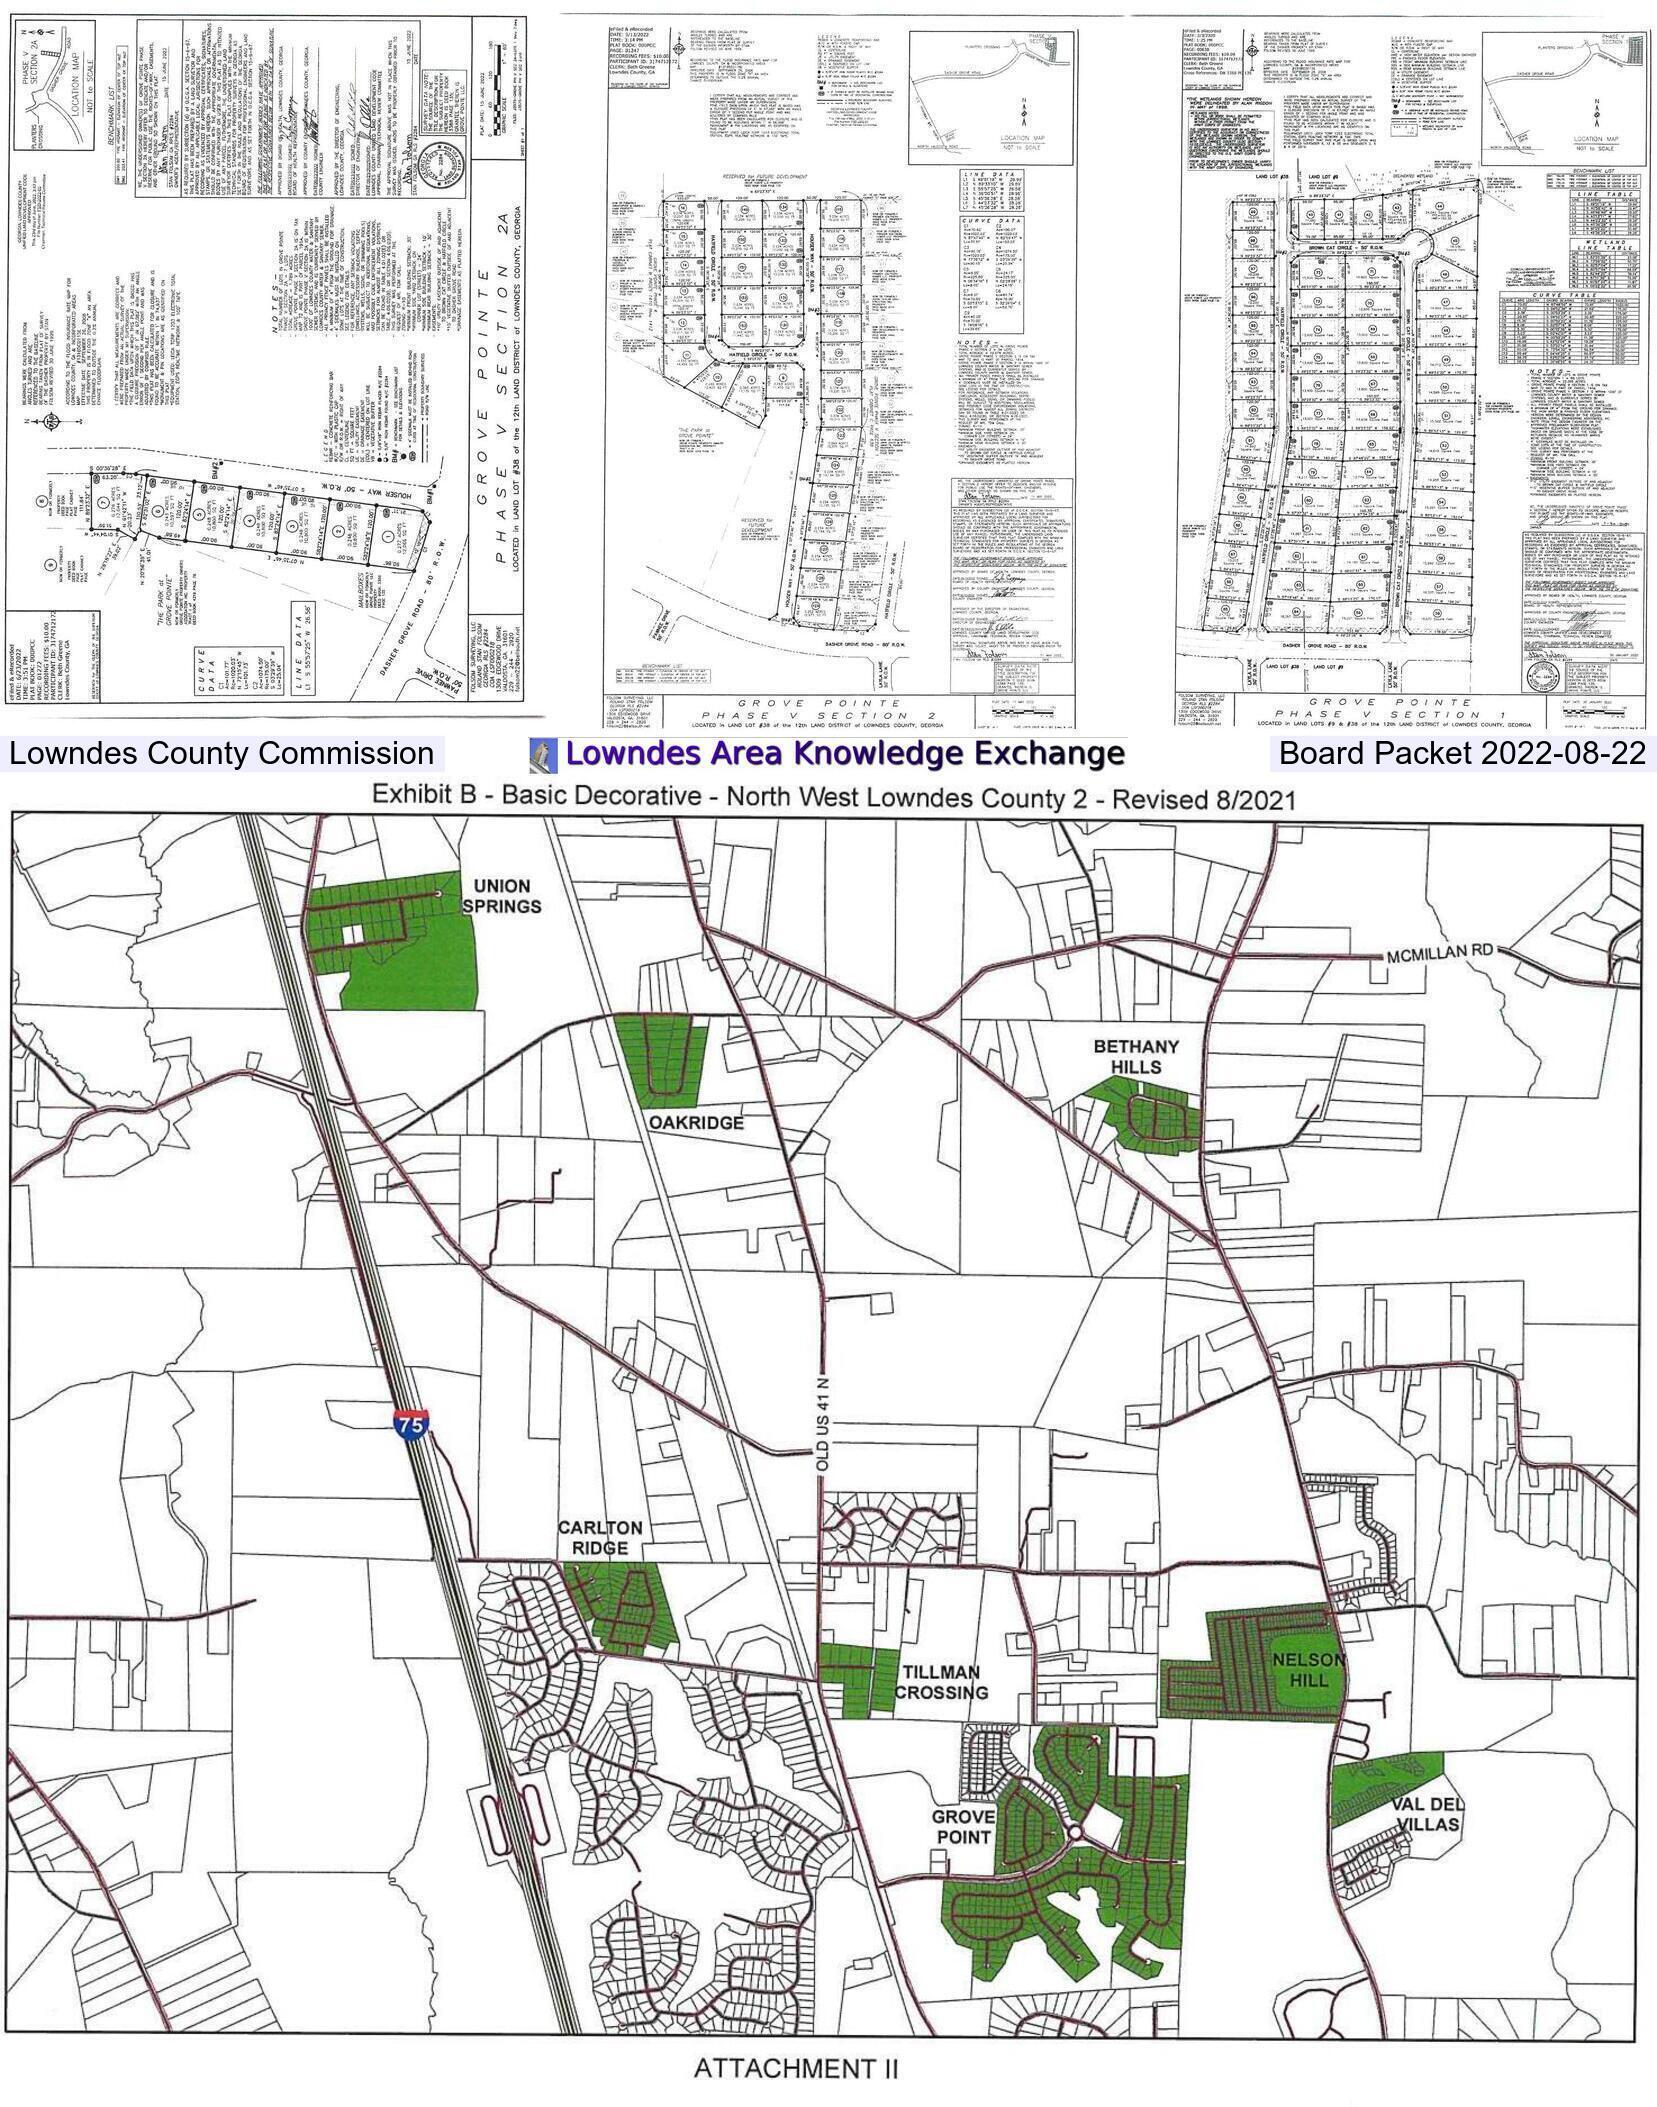 Grove Pointe Phase V and Basic Decorative North West Lowndes County 2 Revised